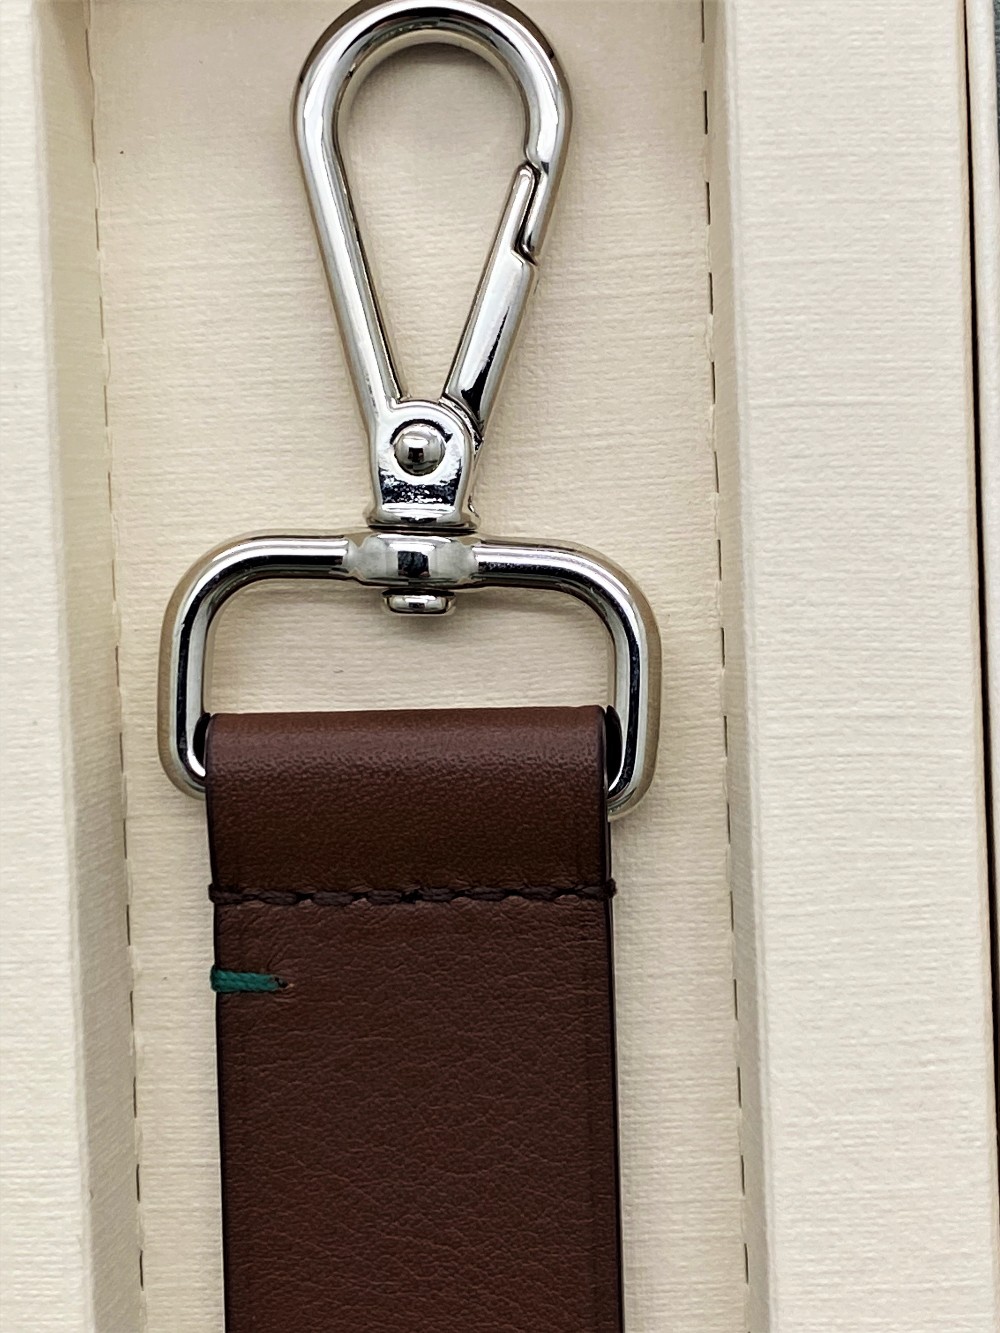 Rolex Official Merchandise- Leather/Chrome Finish Key Ring-New Example - Image 3 of 3